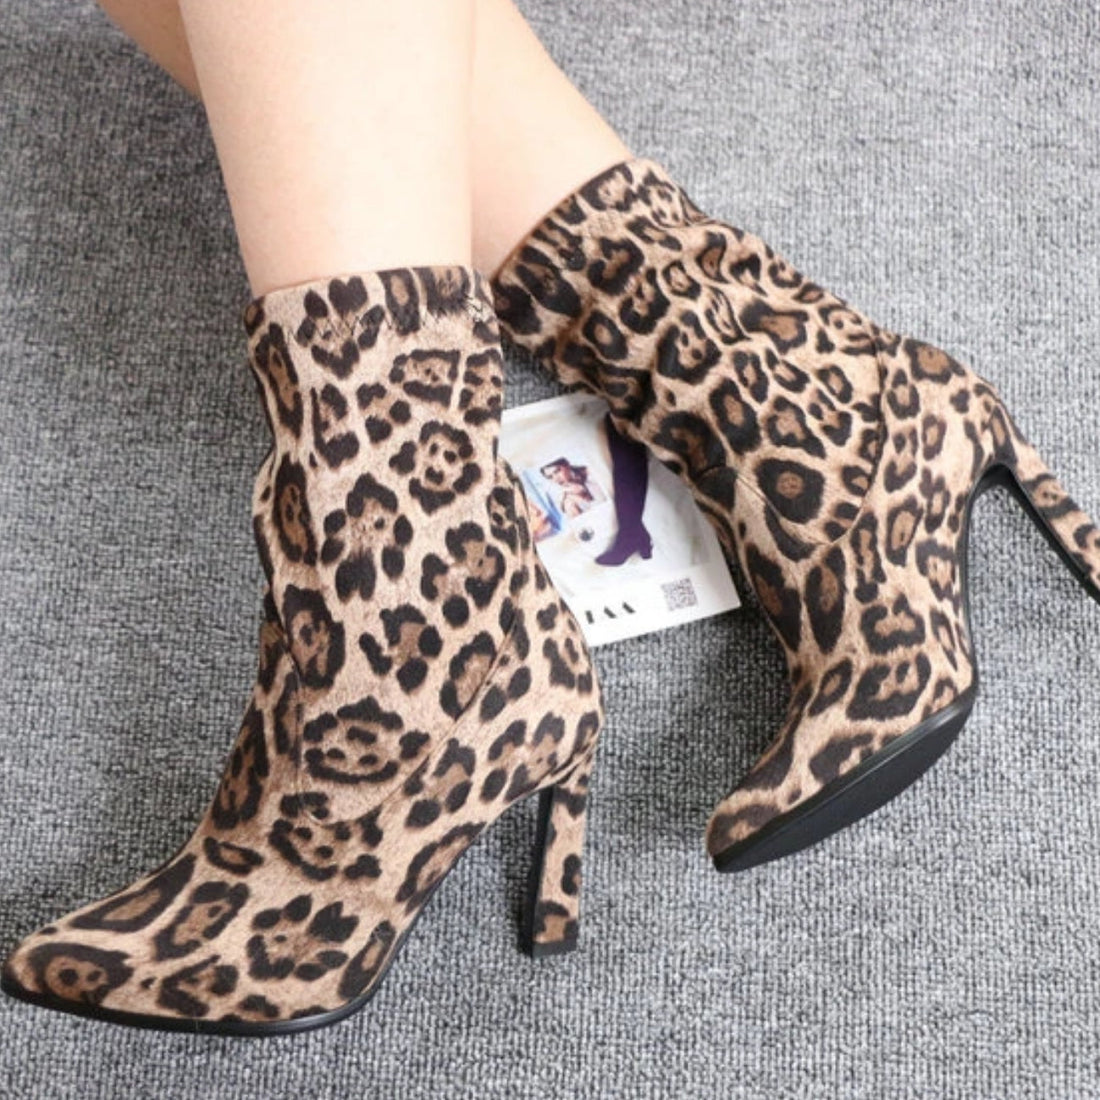 Women's Spring/Autumn Suede Ankle Boots With High Heels